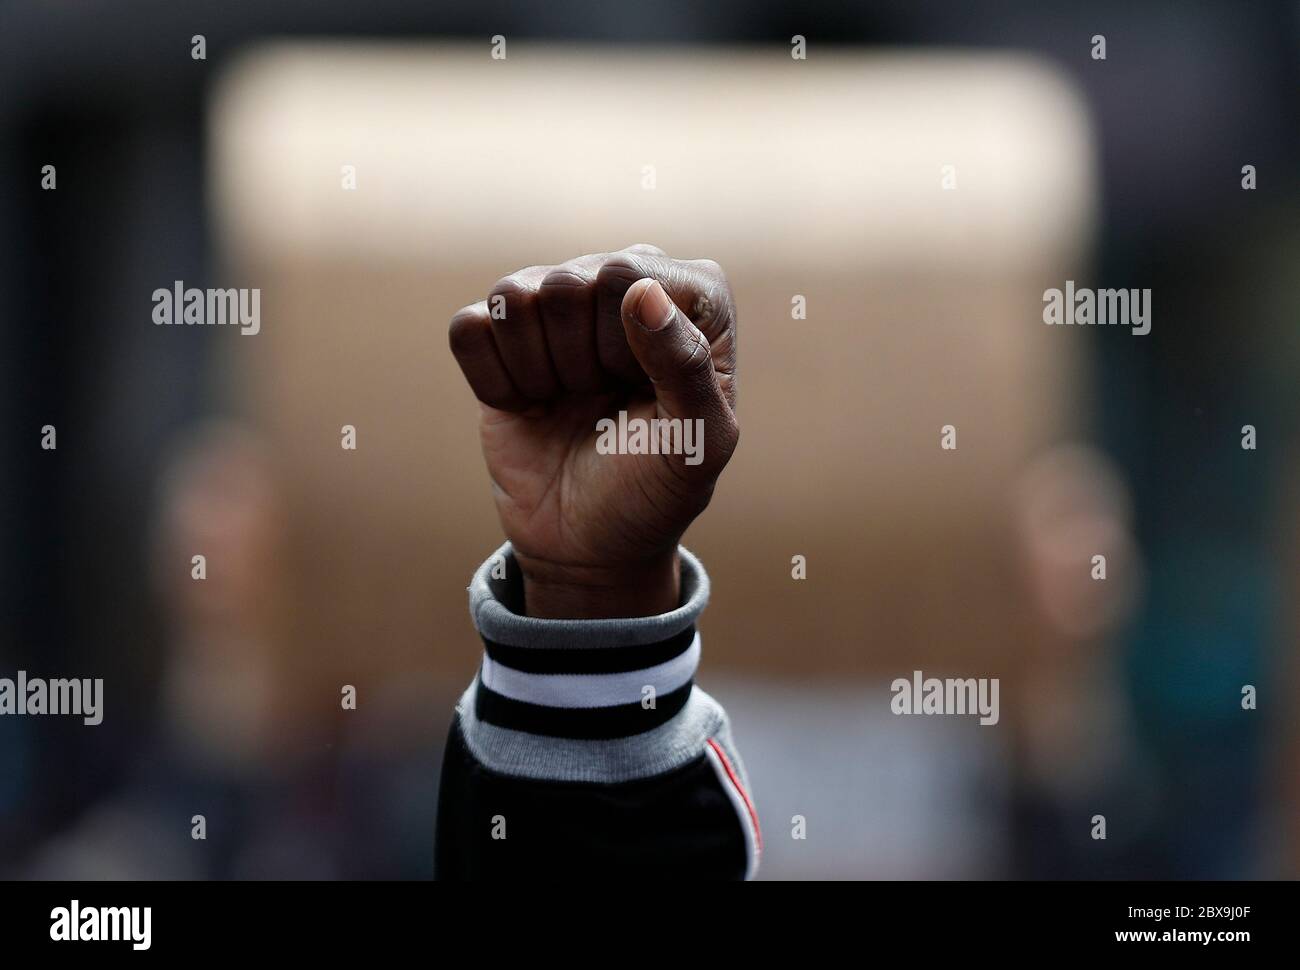 Leicester, Leicestershire, UK. 6th June 2020. A Protester attends a 'Black lives matter' demonstration following the death of American George Floyd while in the custody of Minneapolis police. Credit Darren Staples/Alamy Live News. Stock Photo